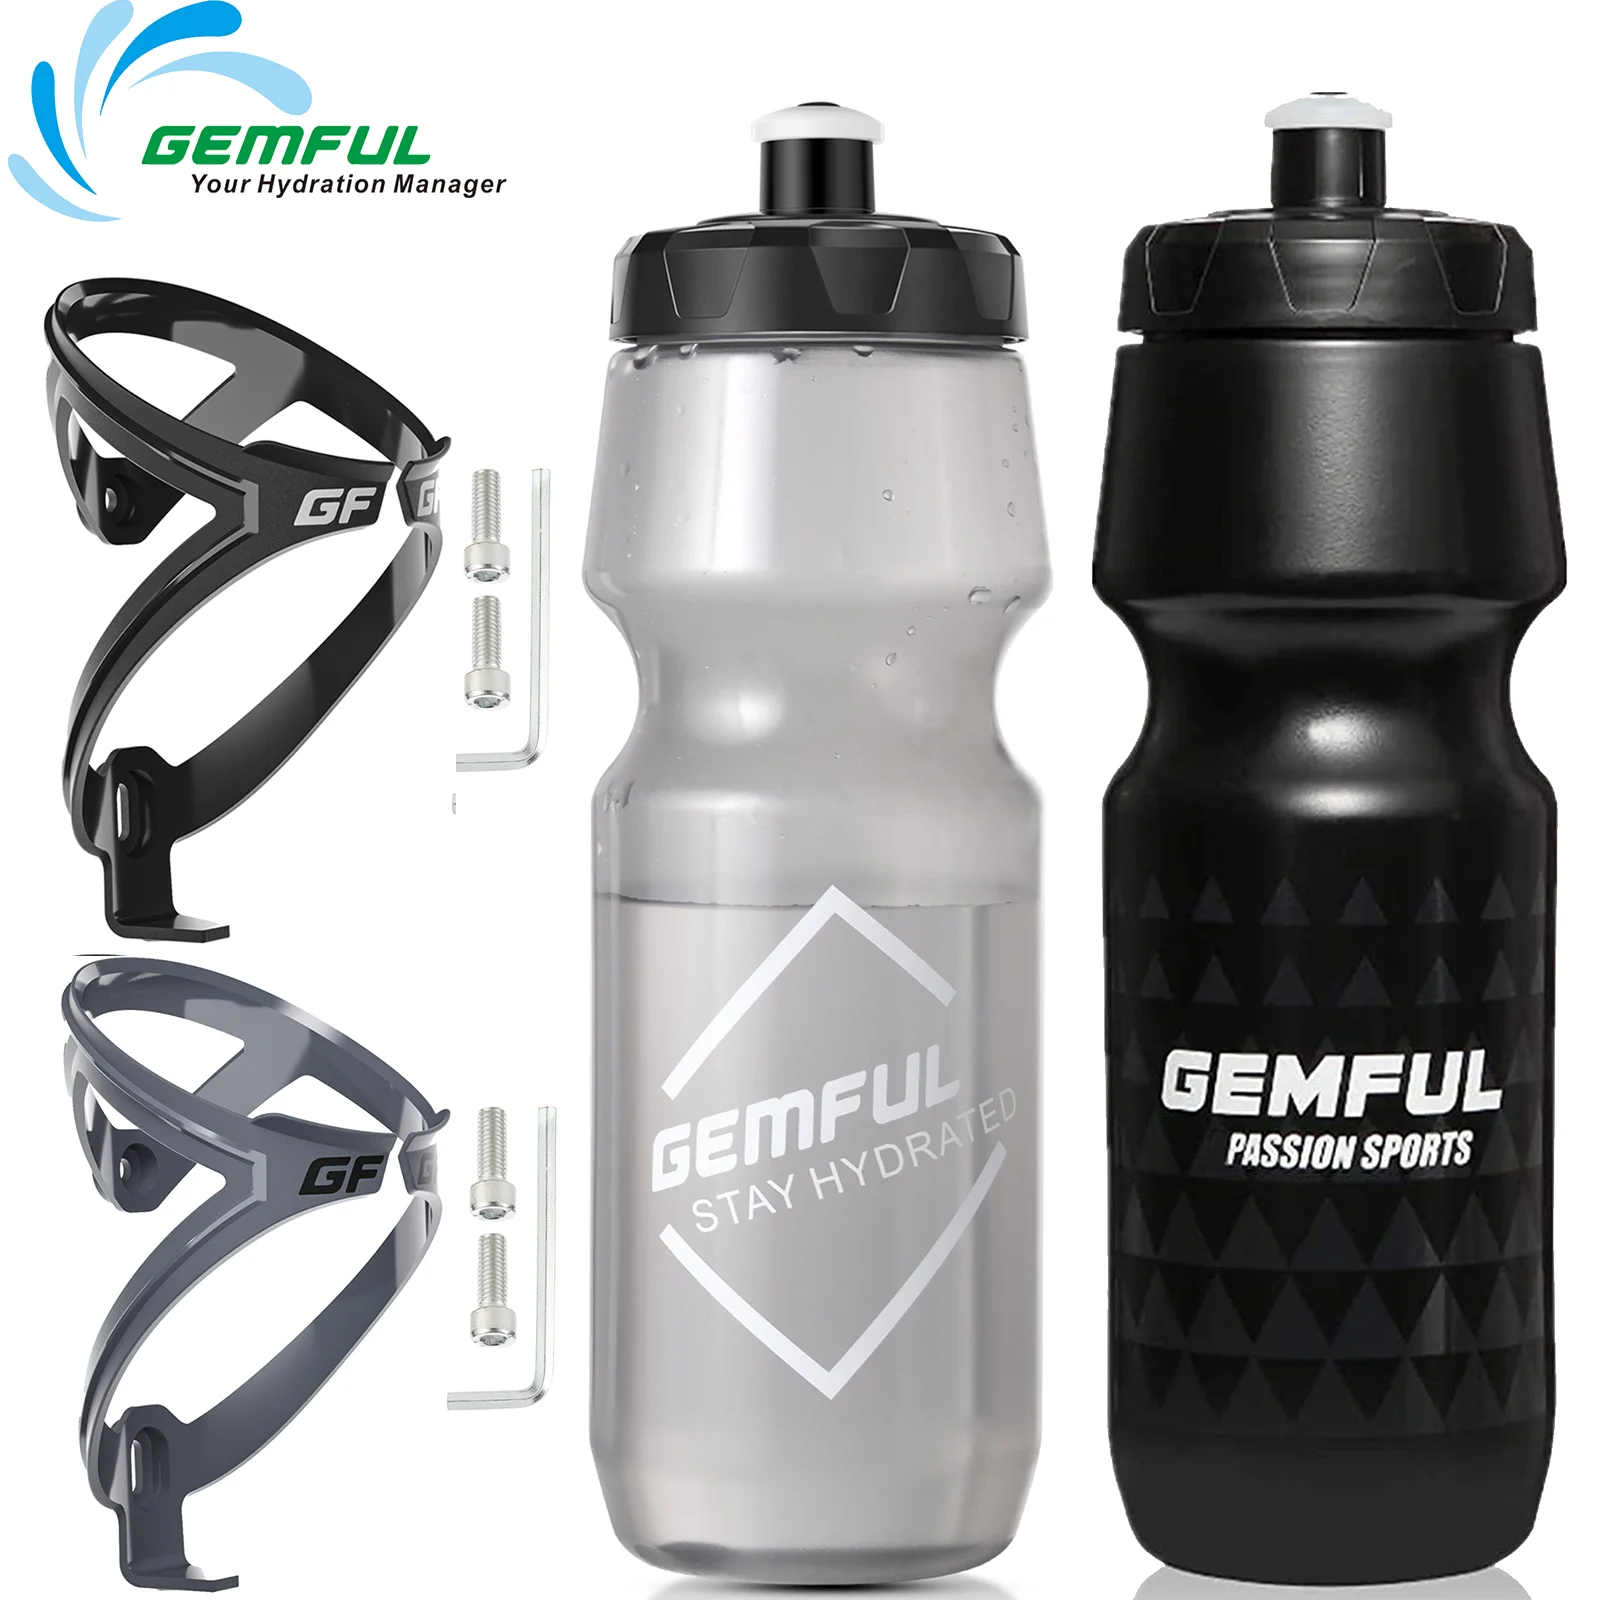 

GEMFUL Sports Squeeze Water Bottle with Holder BPA Free Reusable Bicycle/OutdoorsCycling/Running Water Container 24oz